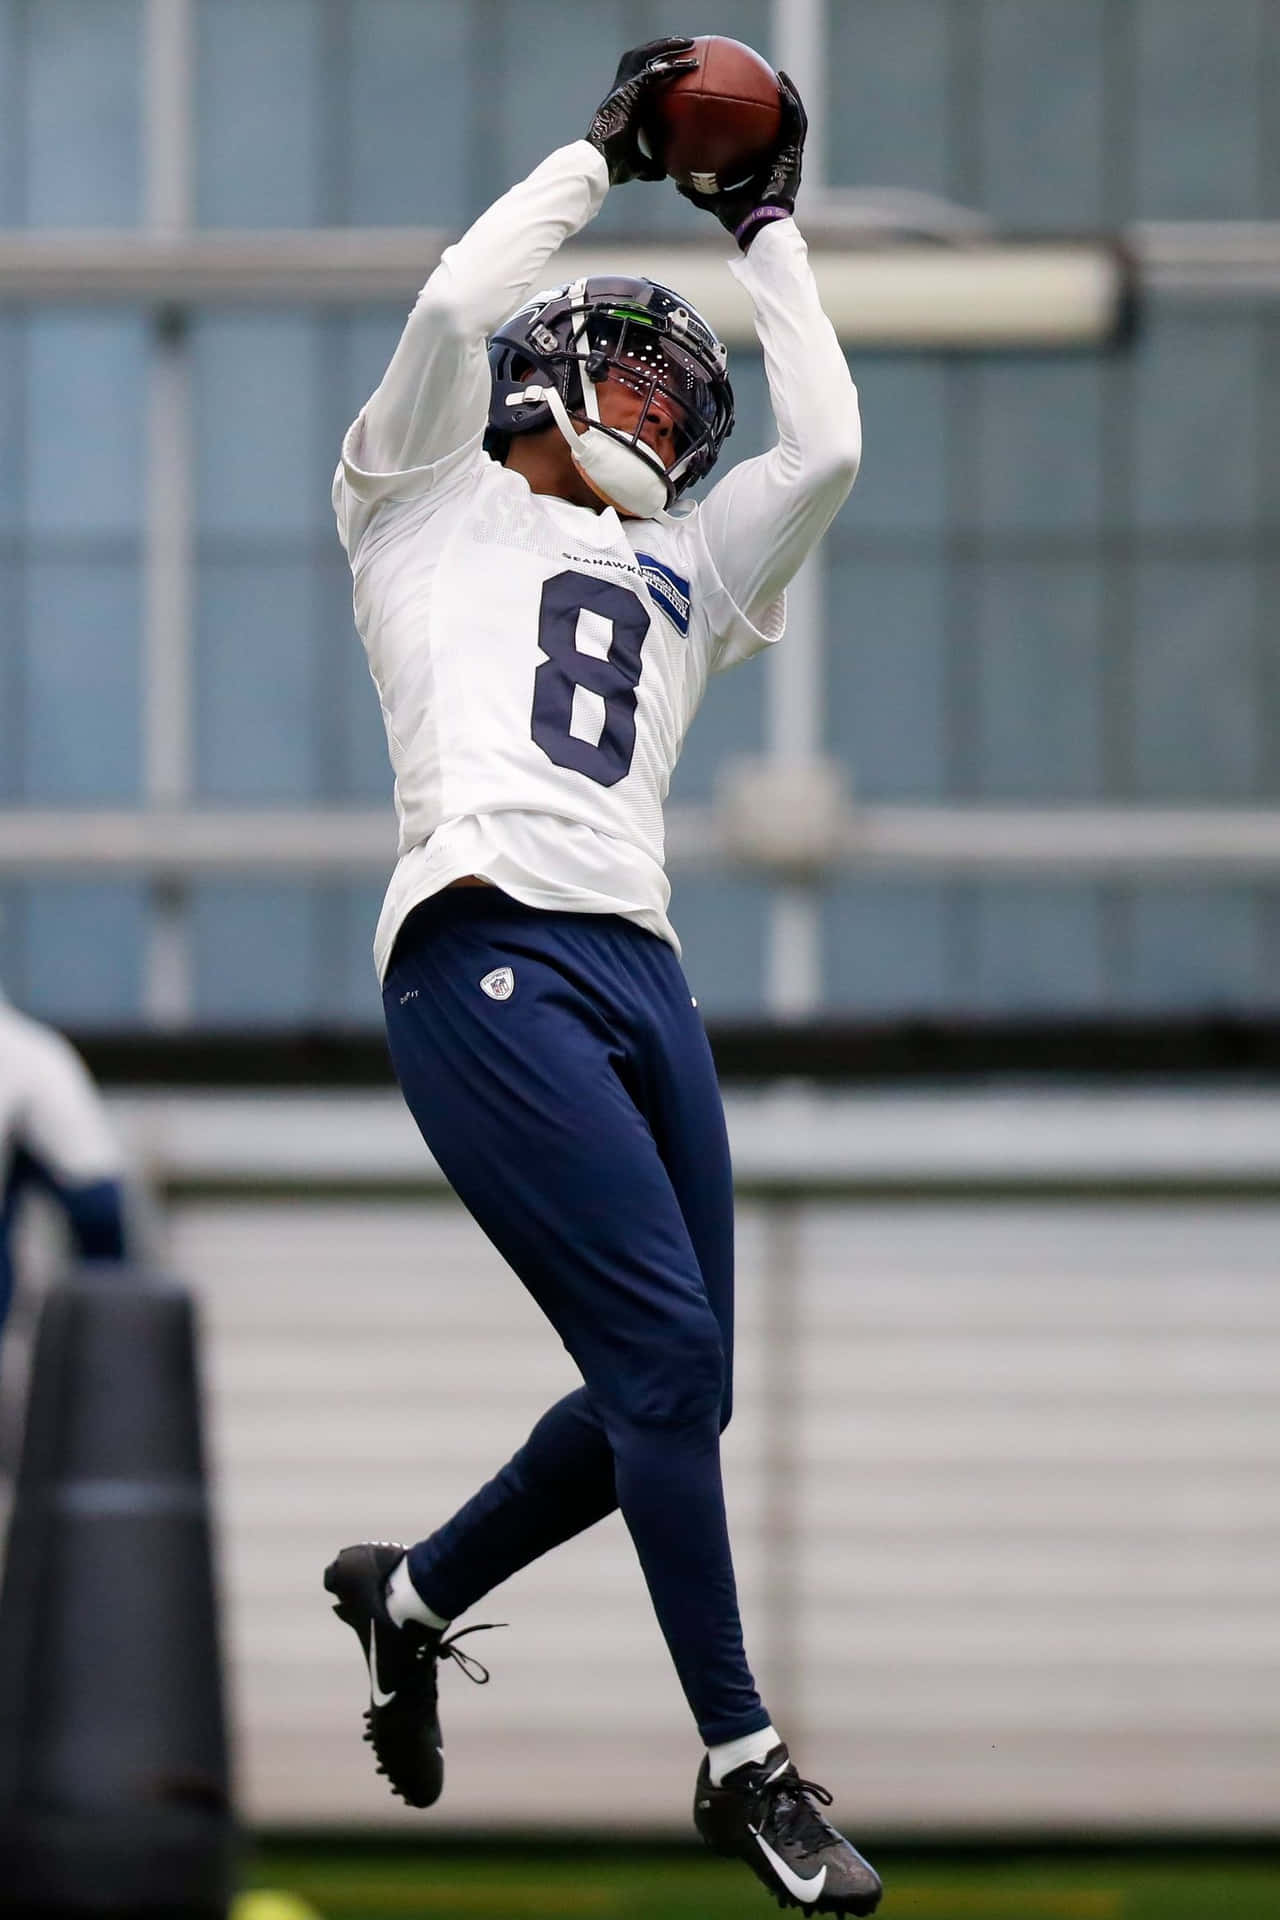 Football Player Catching Ball During Practice Wallpaper